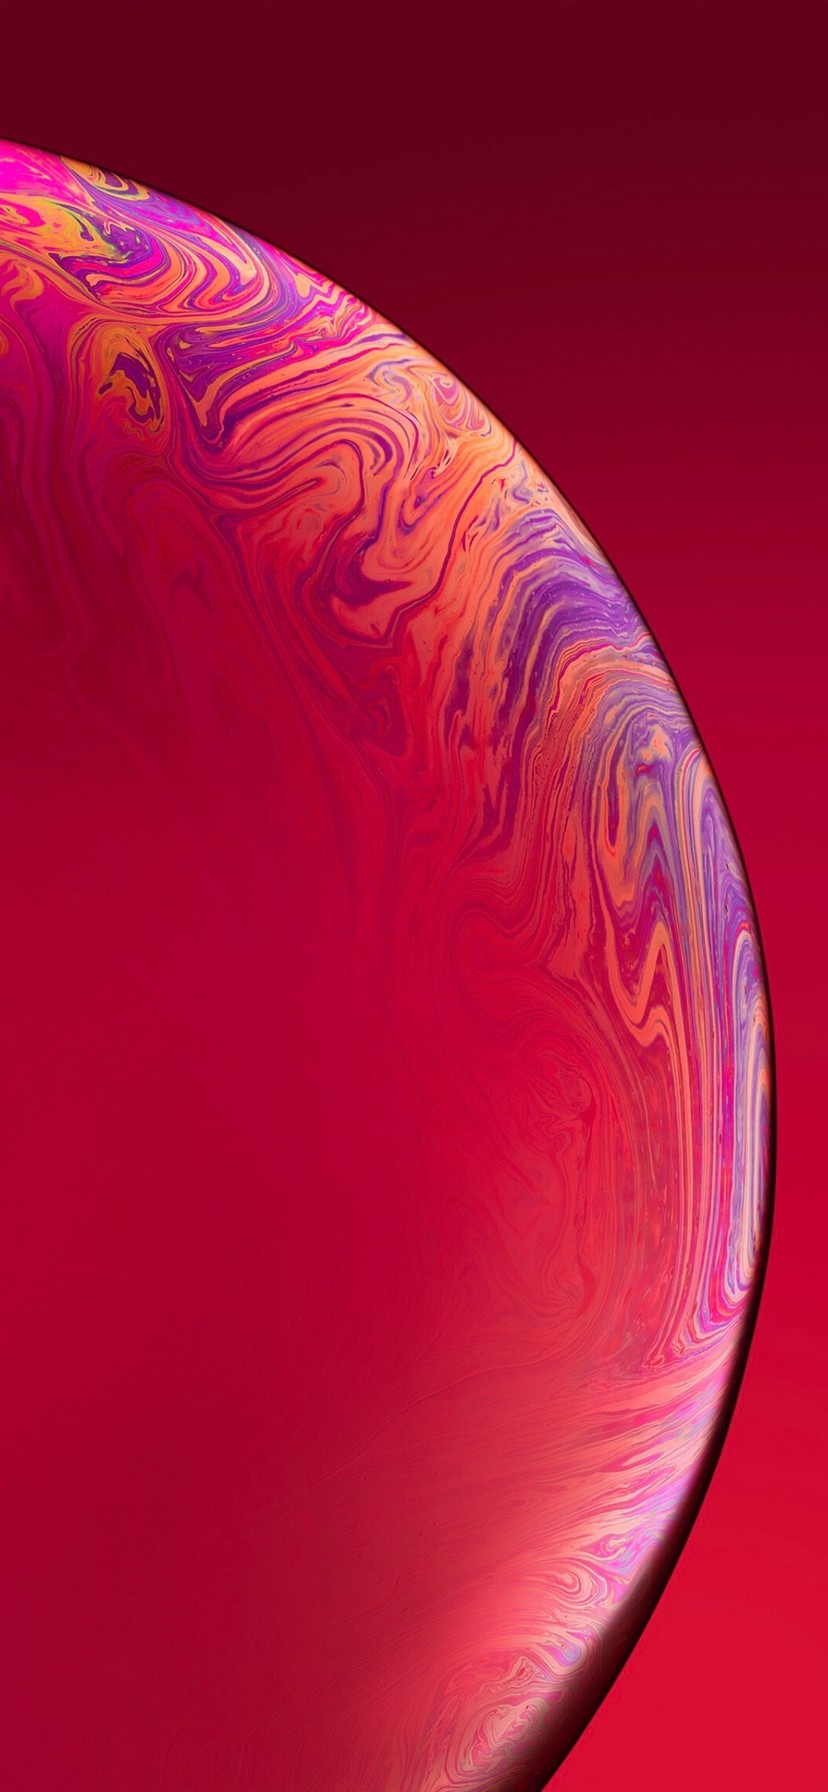 iPhone XR Home Screen Wallpaper with high-resolution 828x1792 pixel. You can set as wallpaper for Apple iPhone X, XS Max, XR, 8, 7, 6, SE, iPad. Enjoy and share your favorite HD wallpapers and background images